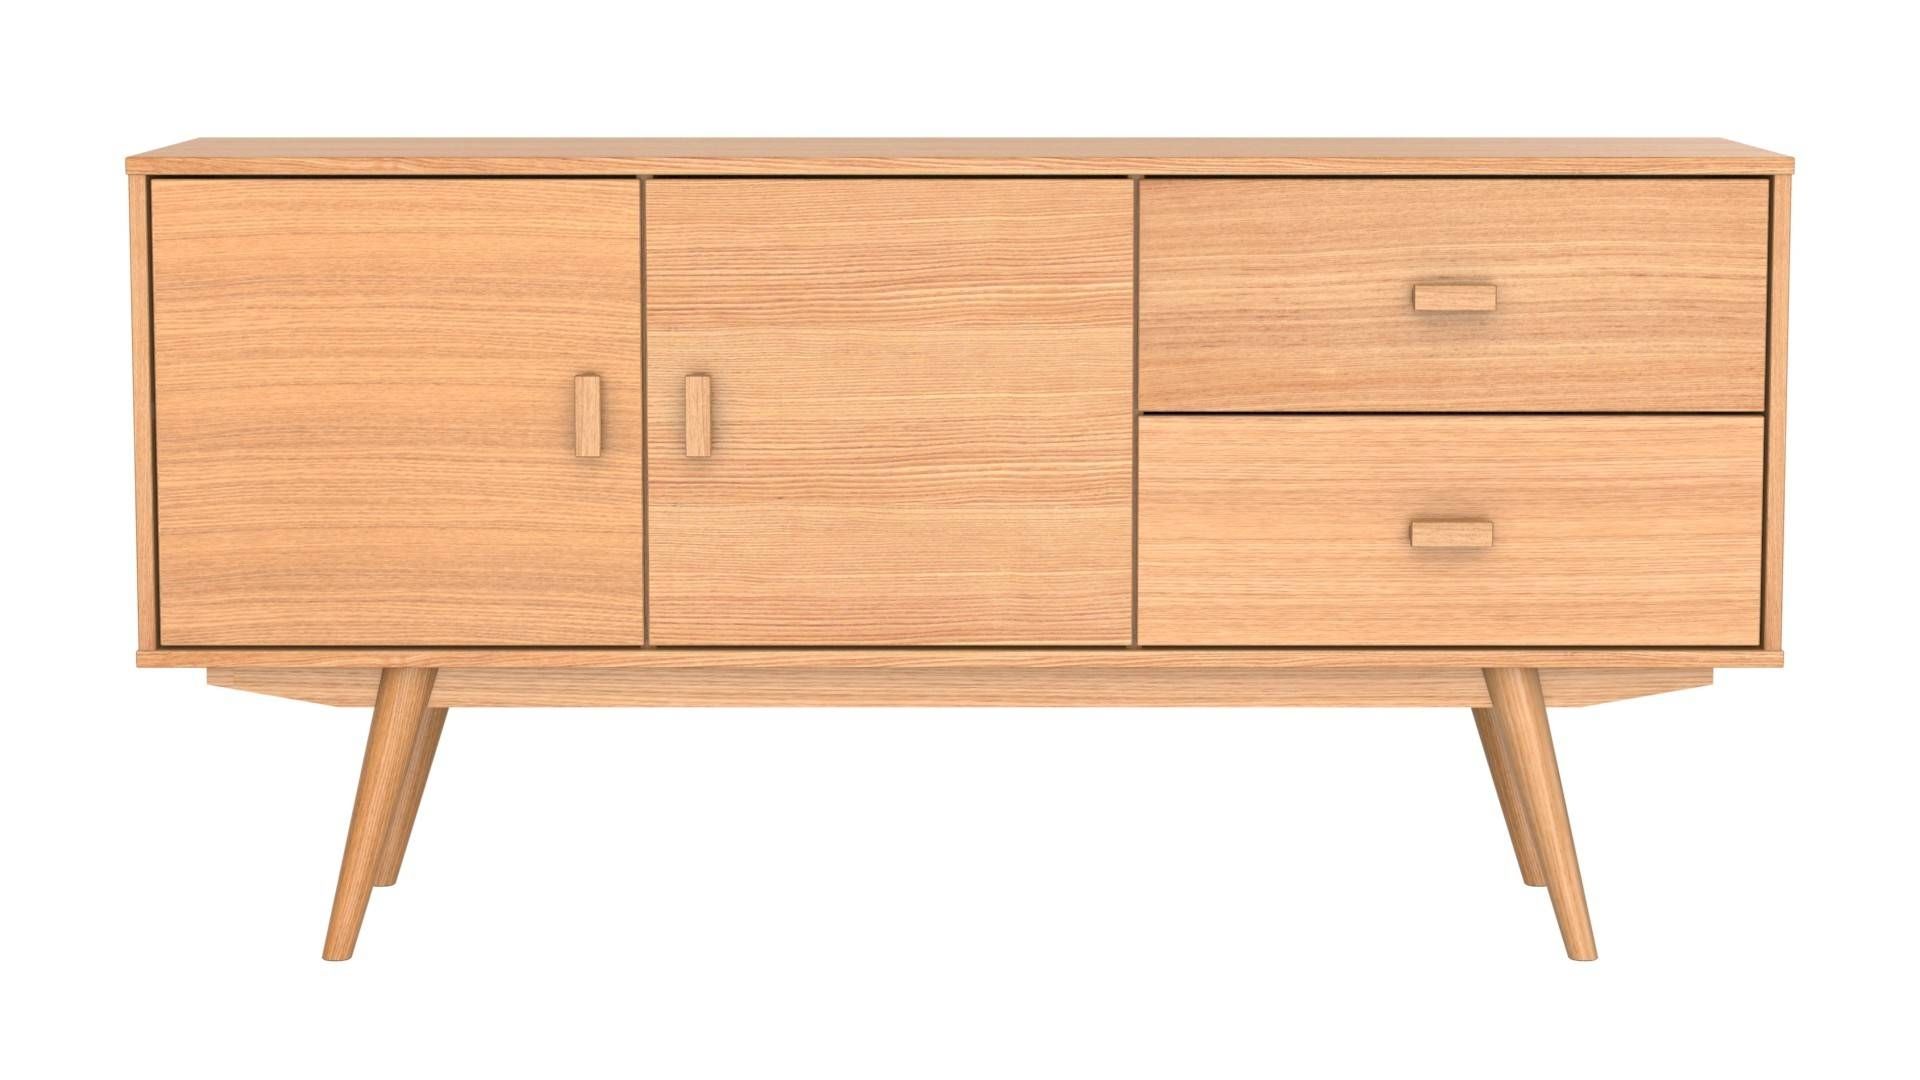 Large Sofia Sideboard | Temple & Webster Intended For Sideboard Sydney (View 5 of 20)